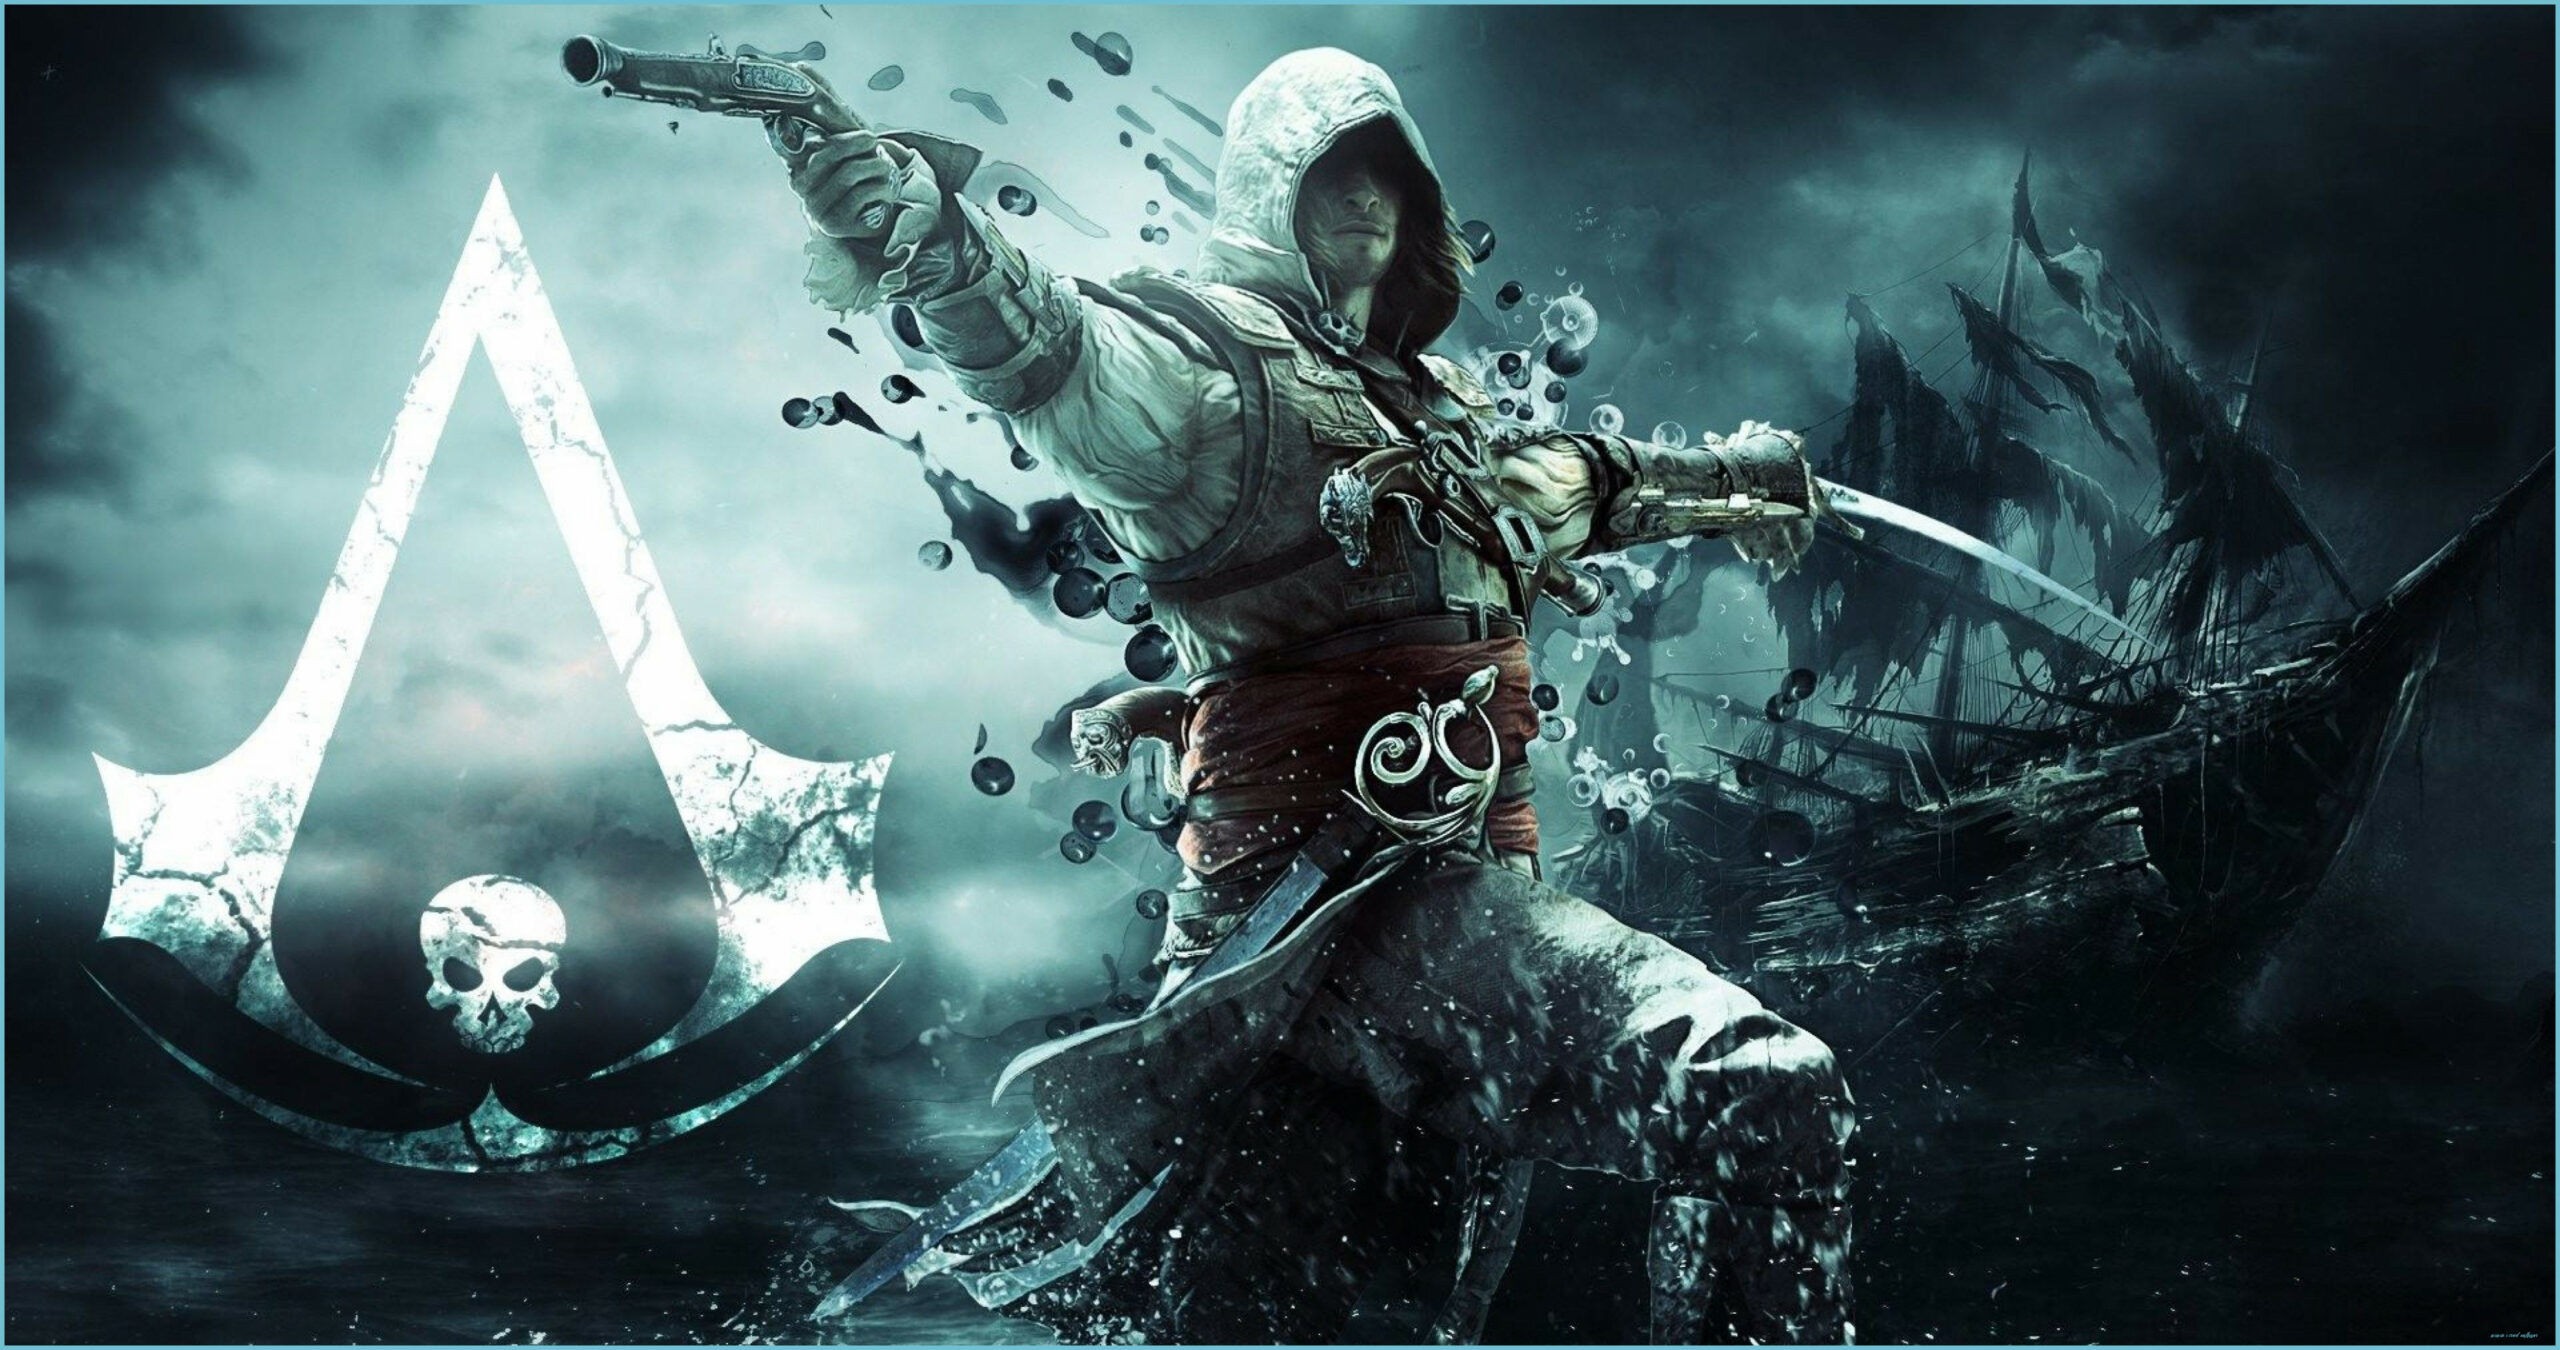 Wallpapers For Fans Of The Game Assassins Creed  Wallpapers13com